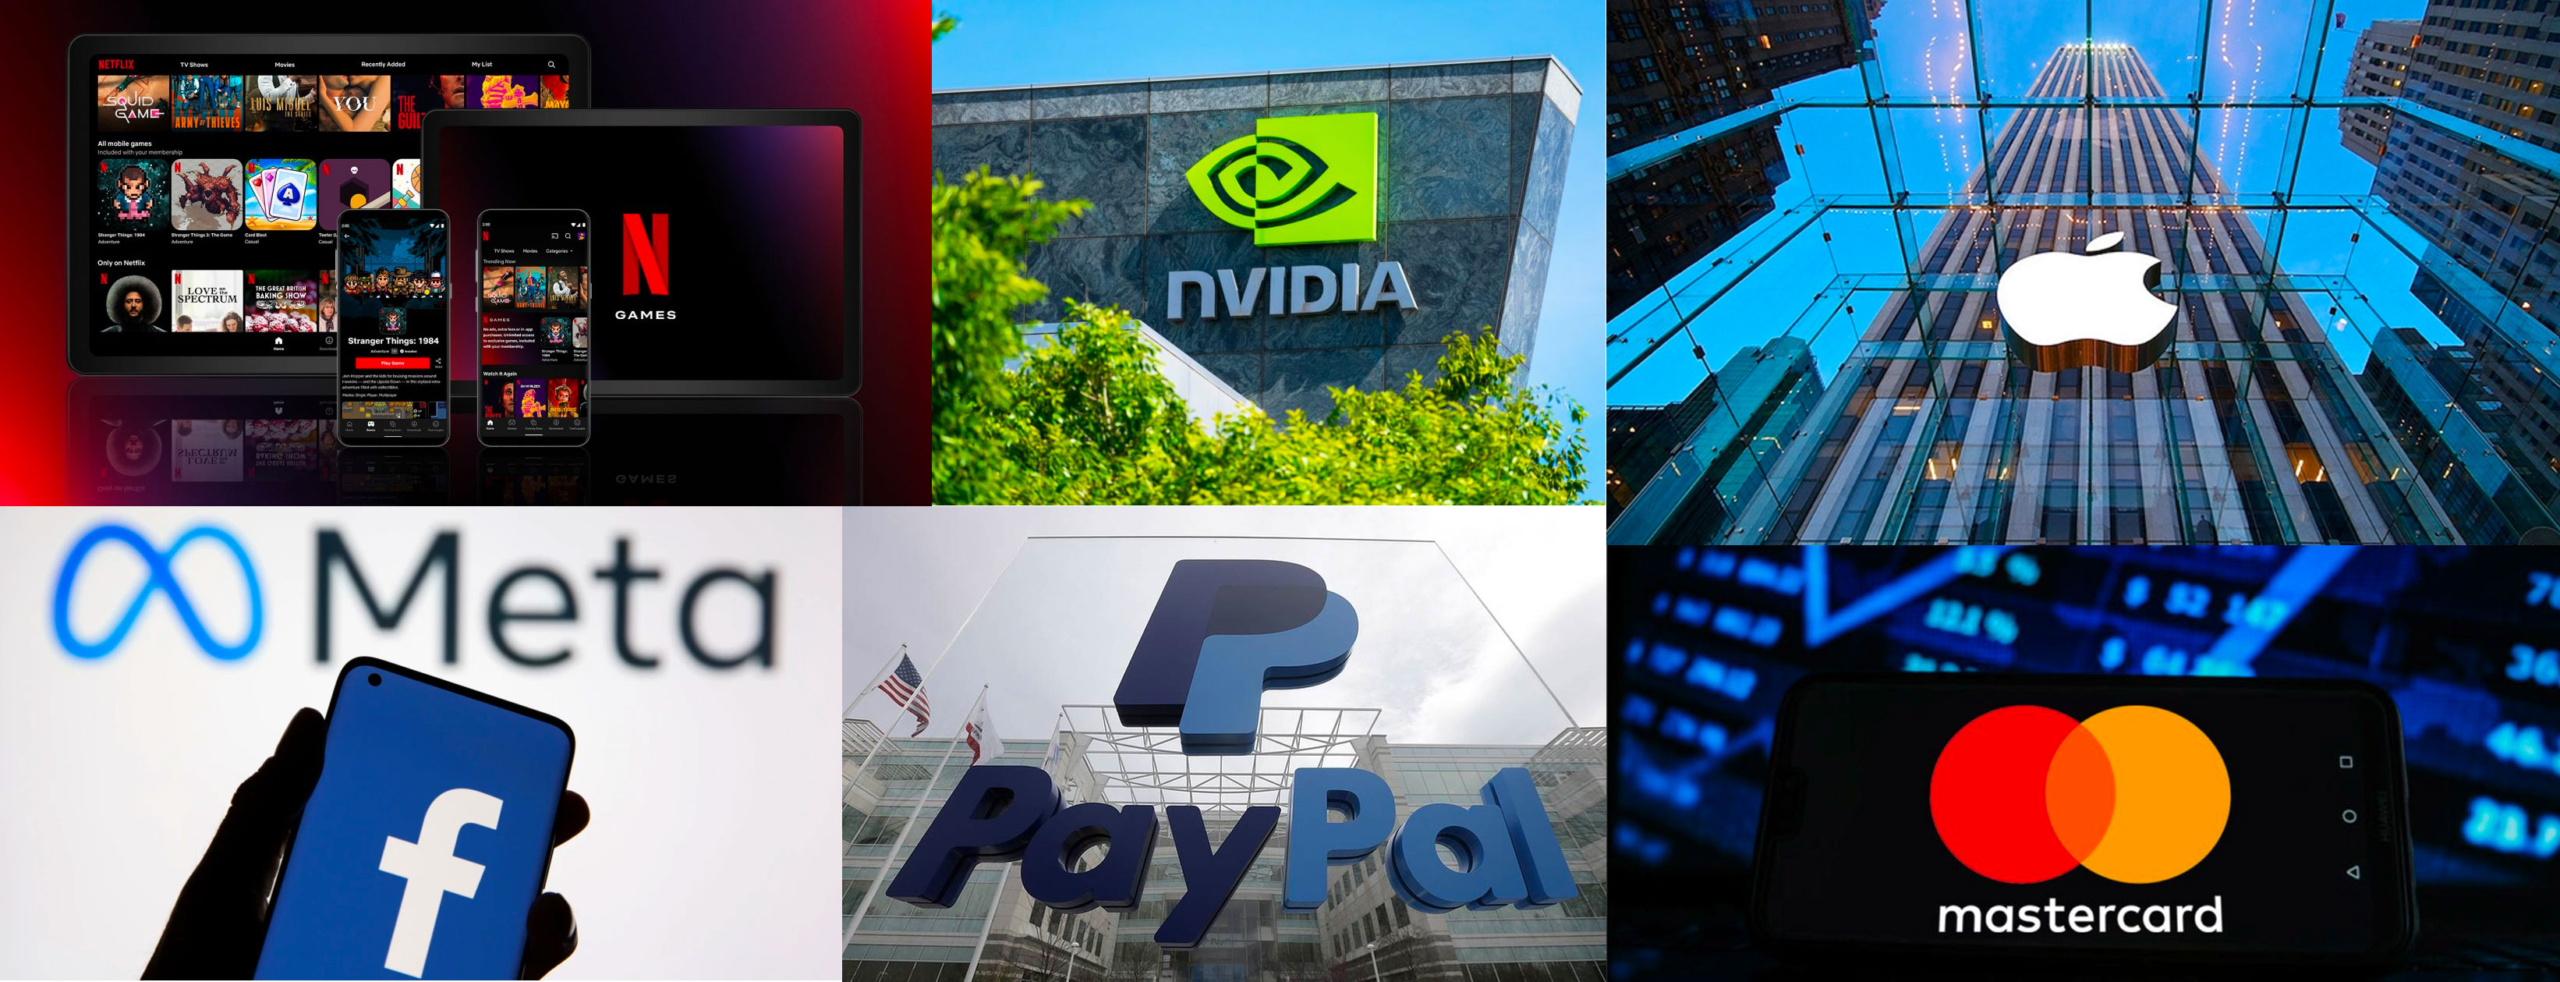 Explain the reasons of buying US stock Netflix (NFLX), Nvidia (NVDA), Meta (FB) and Paypal (PYPL) and selling Apple (AAPL) and MasterCard (MA) and share my views.